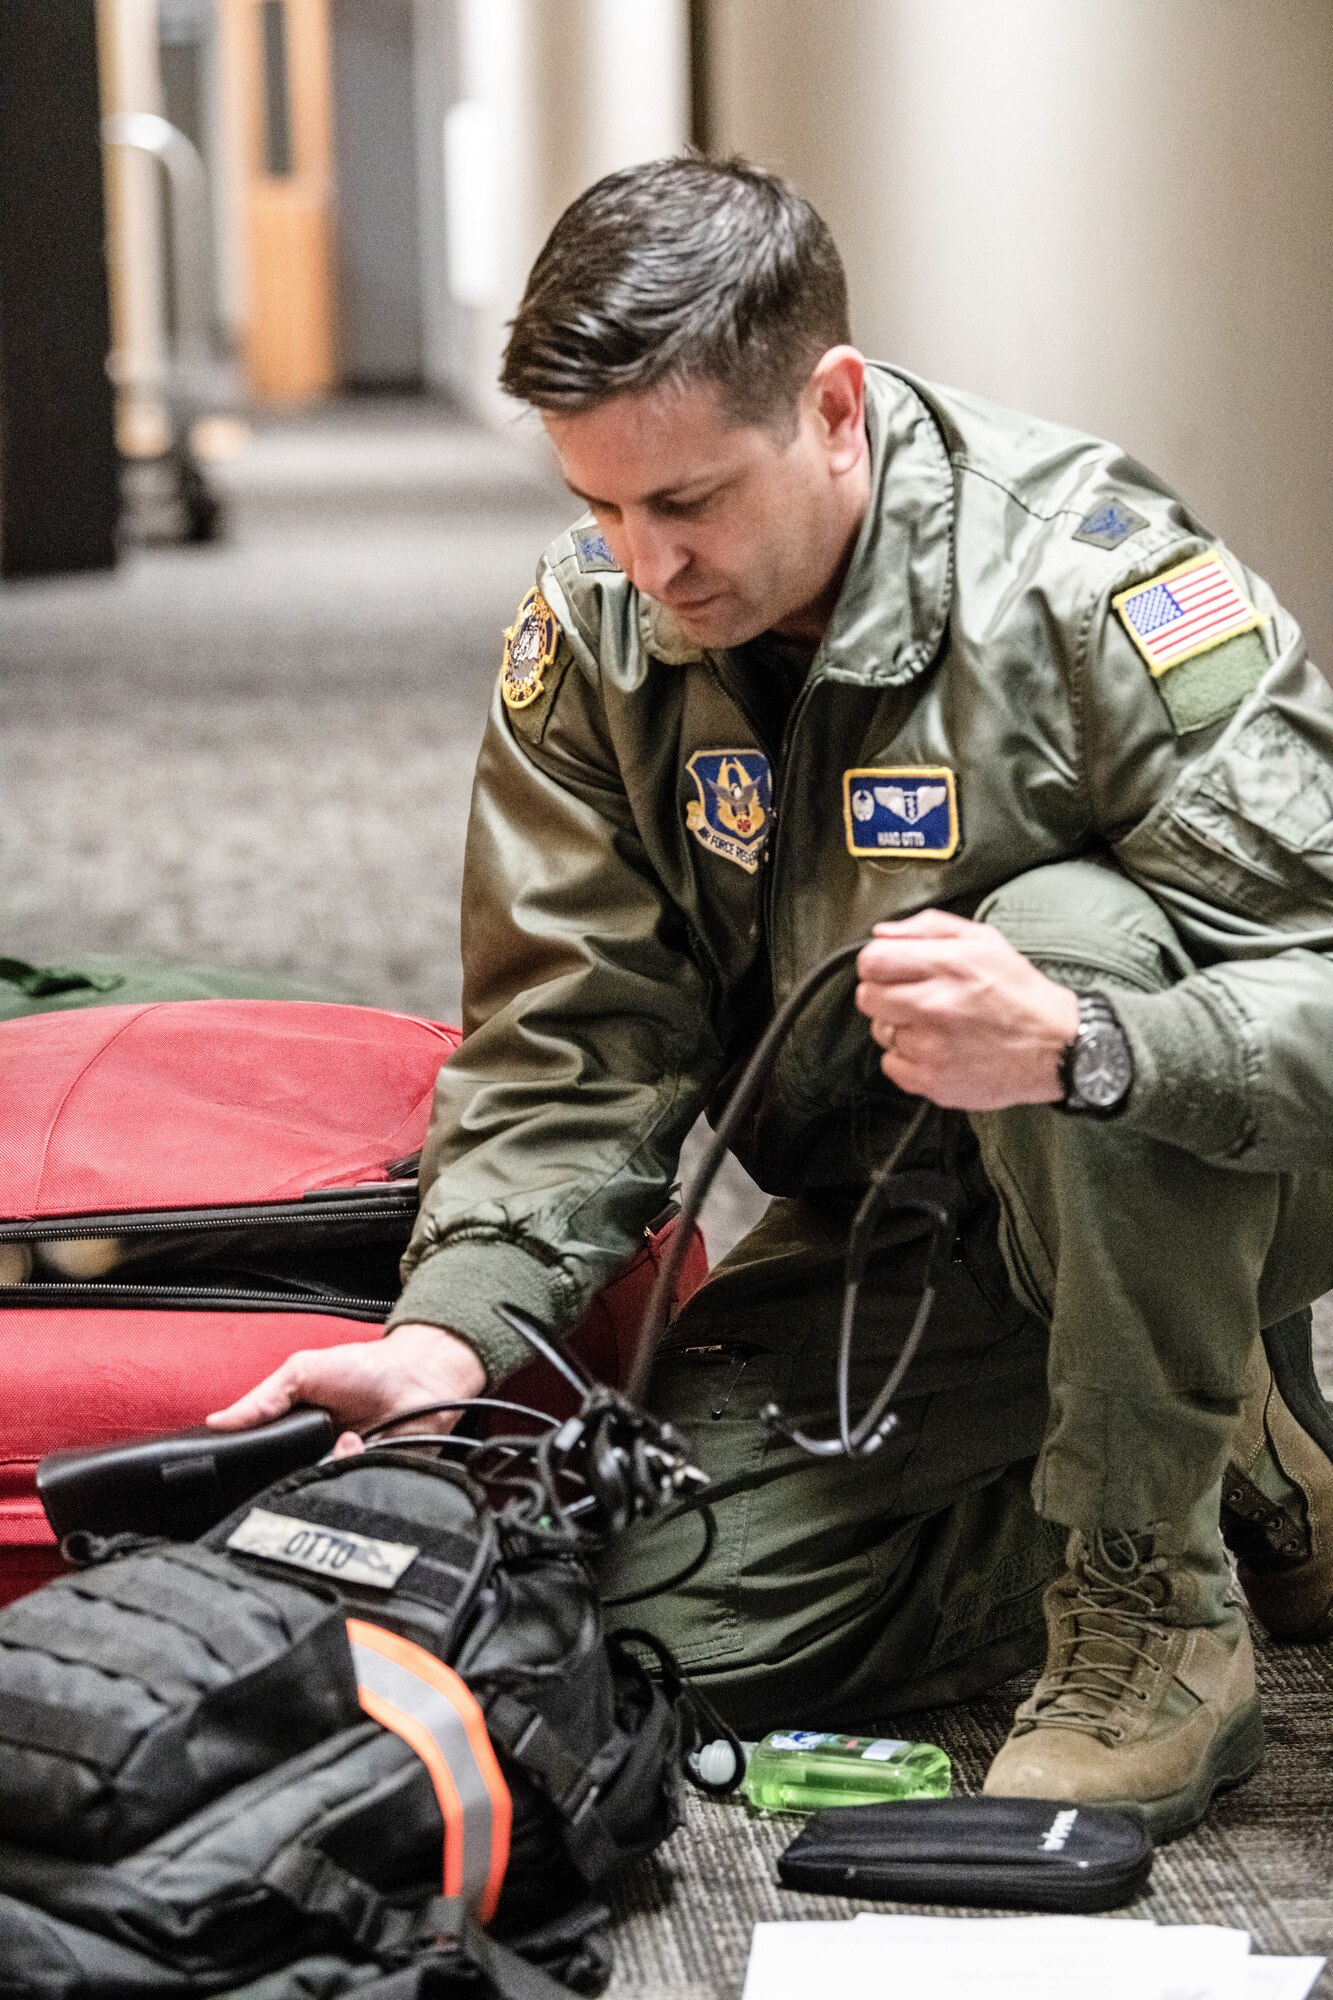 Col. Hans F. Otto, 445th Aerospace Medicine Squadron commander, checks his luggage for essential items here April 5, 2020. He and nurses from the 445th Airlift Wing’s Aeromedical Staging Squadrons were notified April 4, 2020 that they would be mobilized to New York City to help with the COVID-19 pandemic. The Citizen Airmen will join other military personnel providing medical services at the Jacob Javits Center in New York City. This deployment is part of a larger mobilization package of more than 120 doctors, nurses and respiratory technicians Air Force Reserve units across the nation provided over the past 48 hours in support of COVID-19 response to take care of Americans. (U.S. Air Force photo/Mr. Patrick O’Reilly)